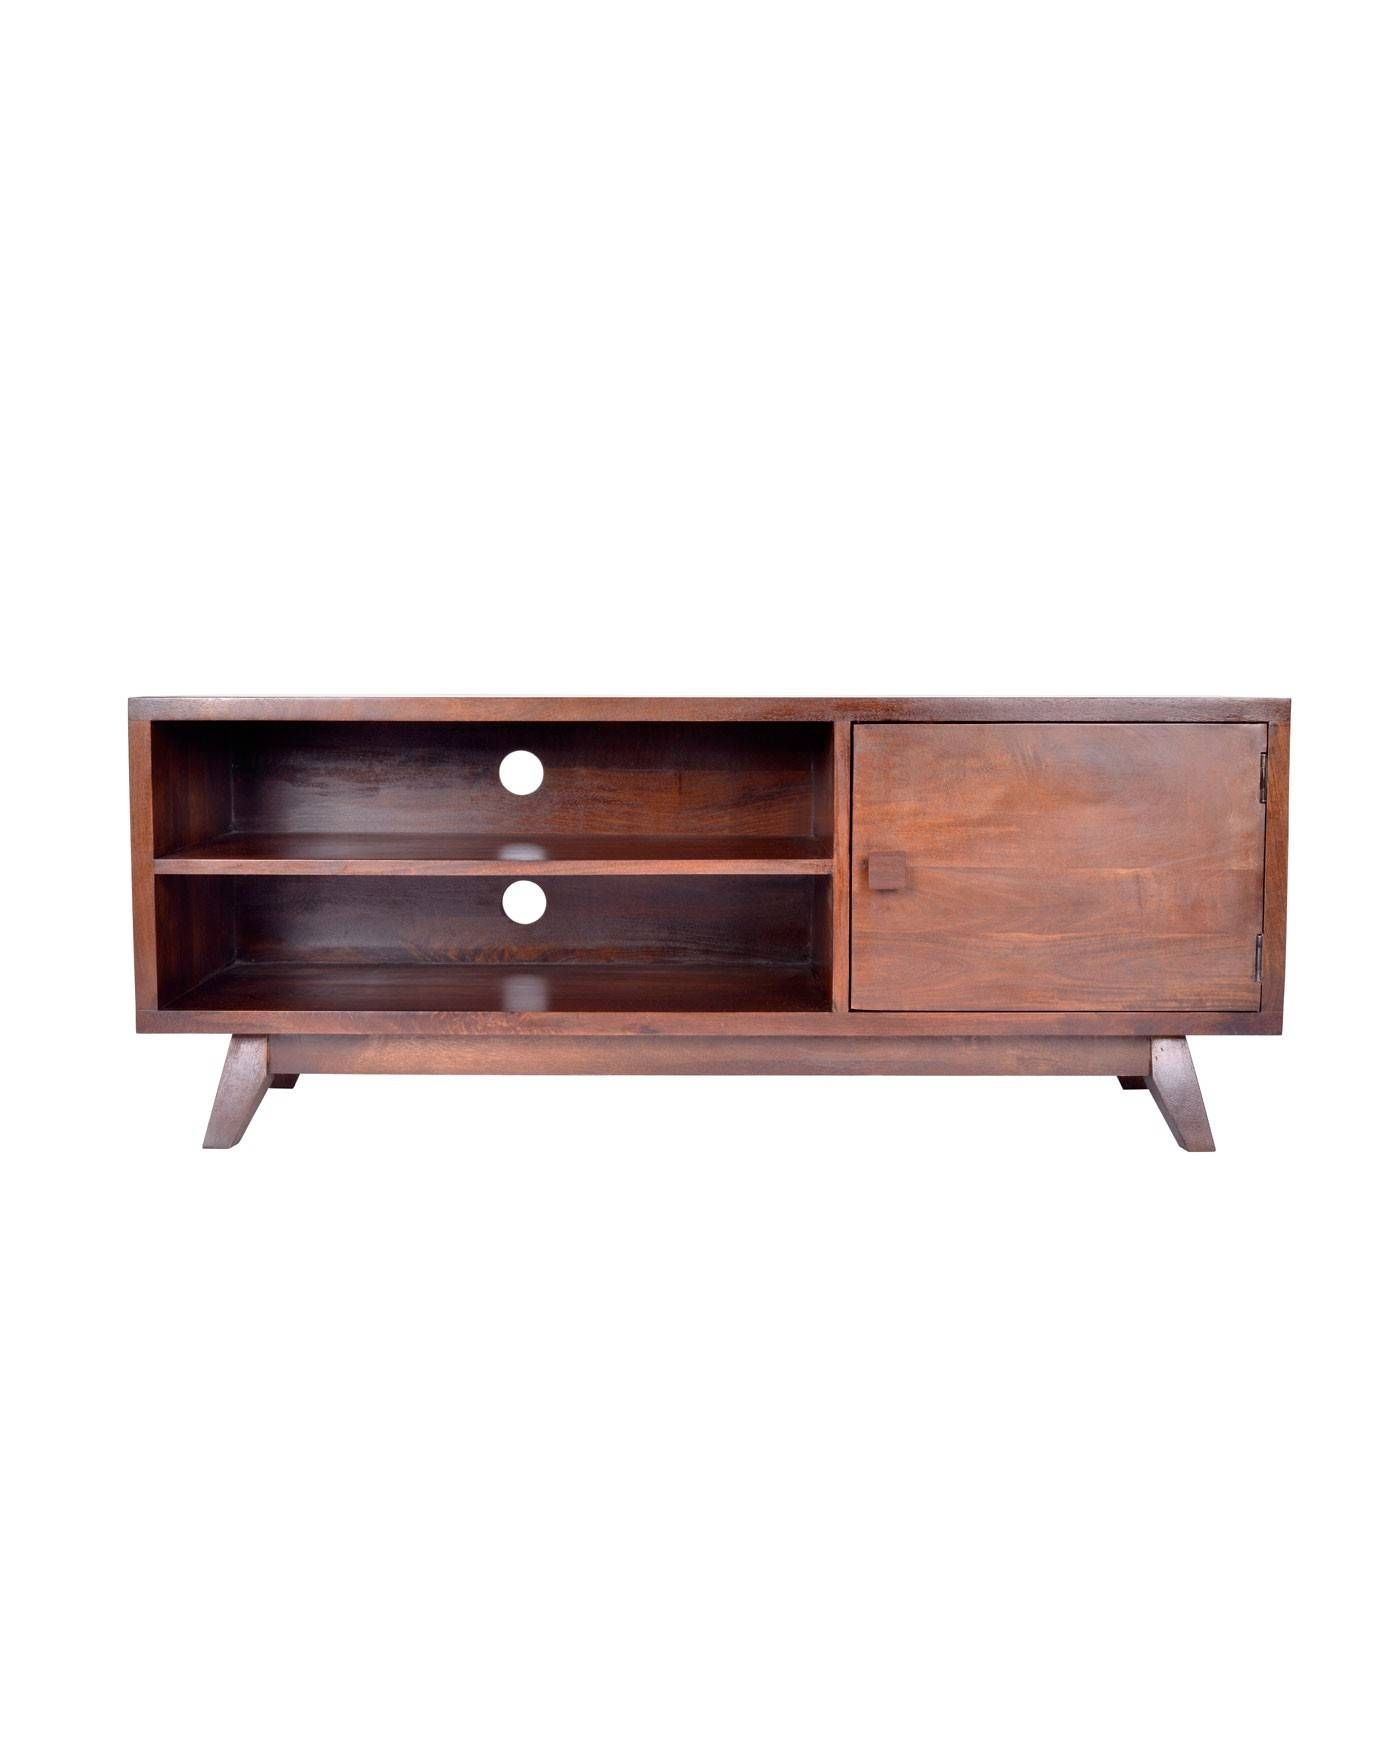 Dark Wood Tv Stand With Shelf Retro Design 100% Solid Wood In Mango Wood Tv Cabinets (View 9 of 15)